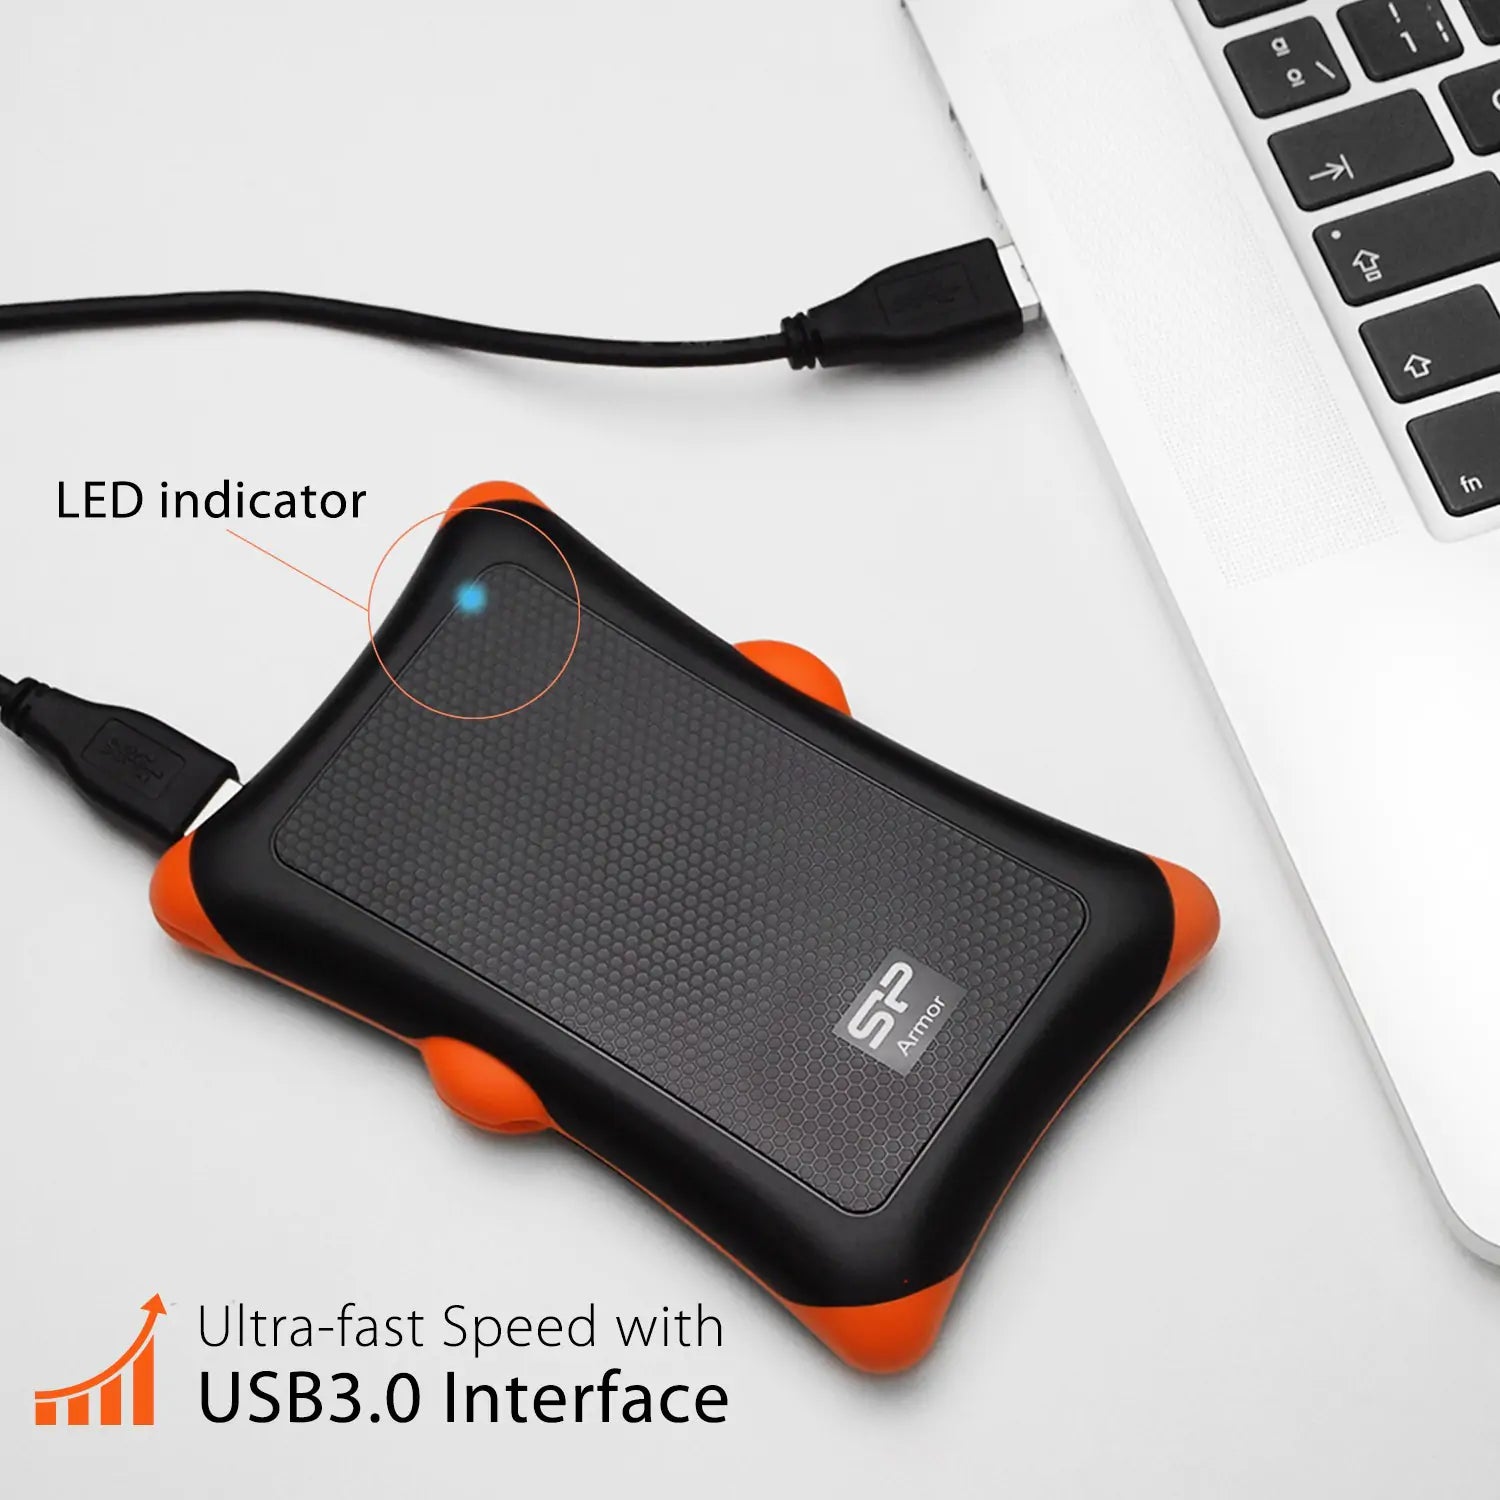 Silicon Power 2TB A30 Rugged Shockproof Portable External Hard Drive USB 3.0 For PC,MAC,XBOX,PS4,PS5 - Orange